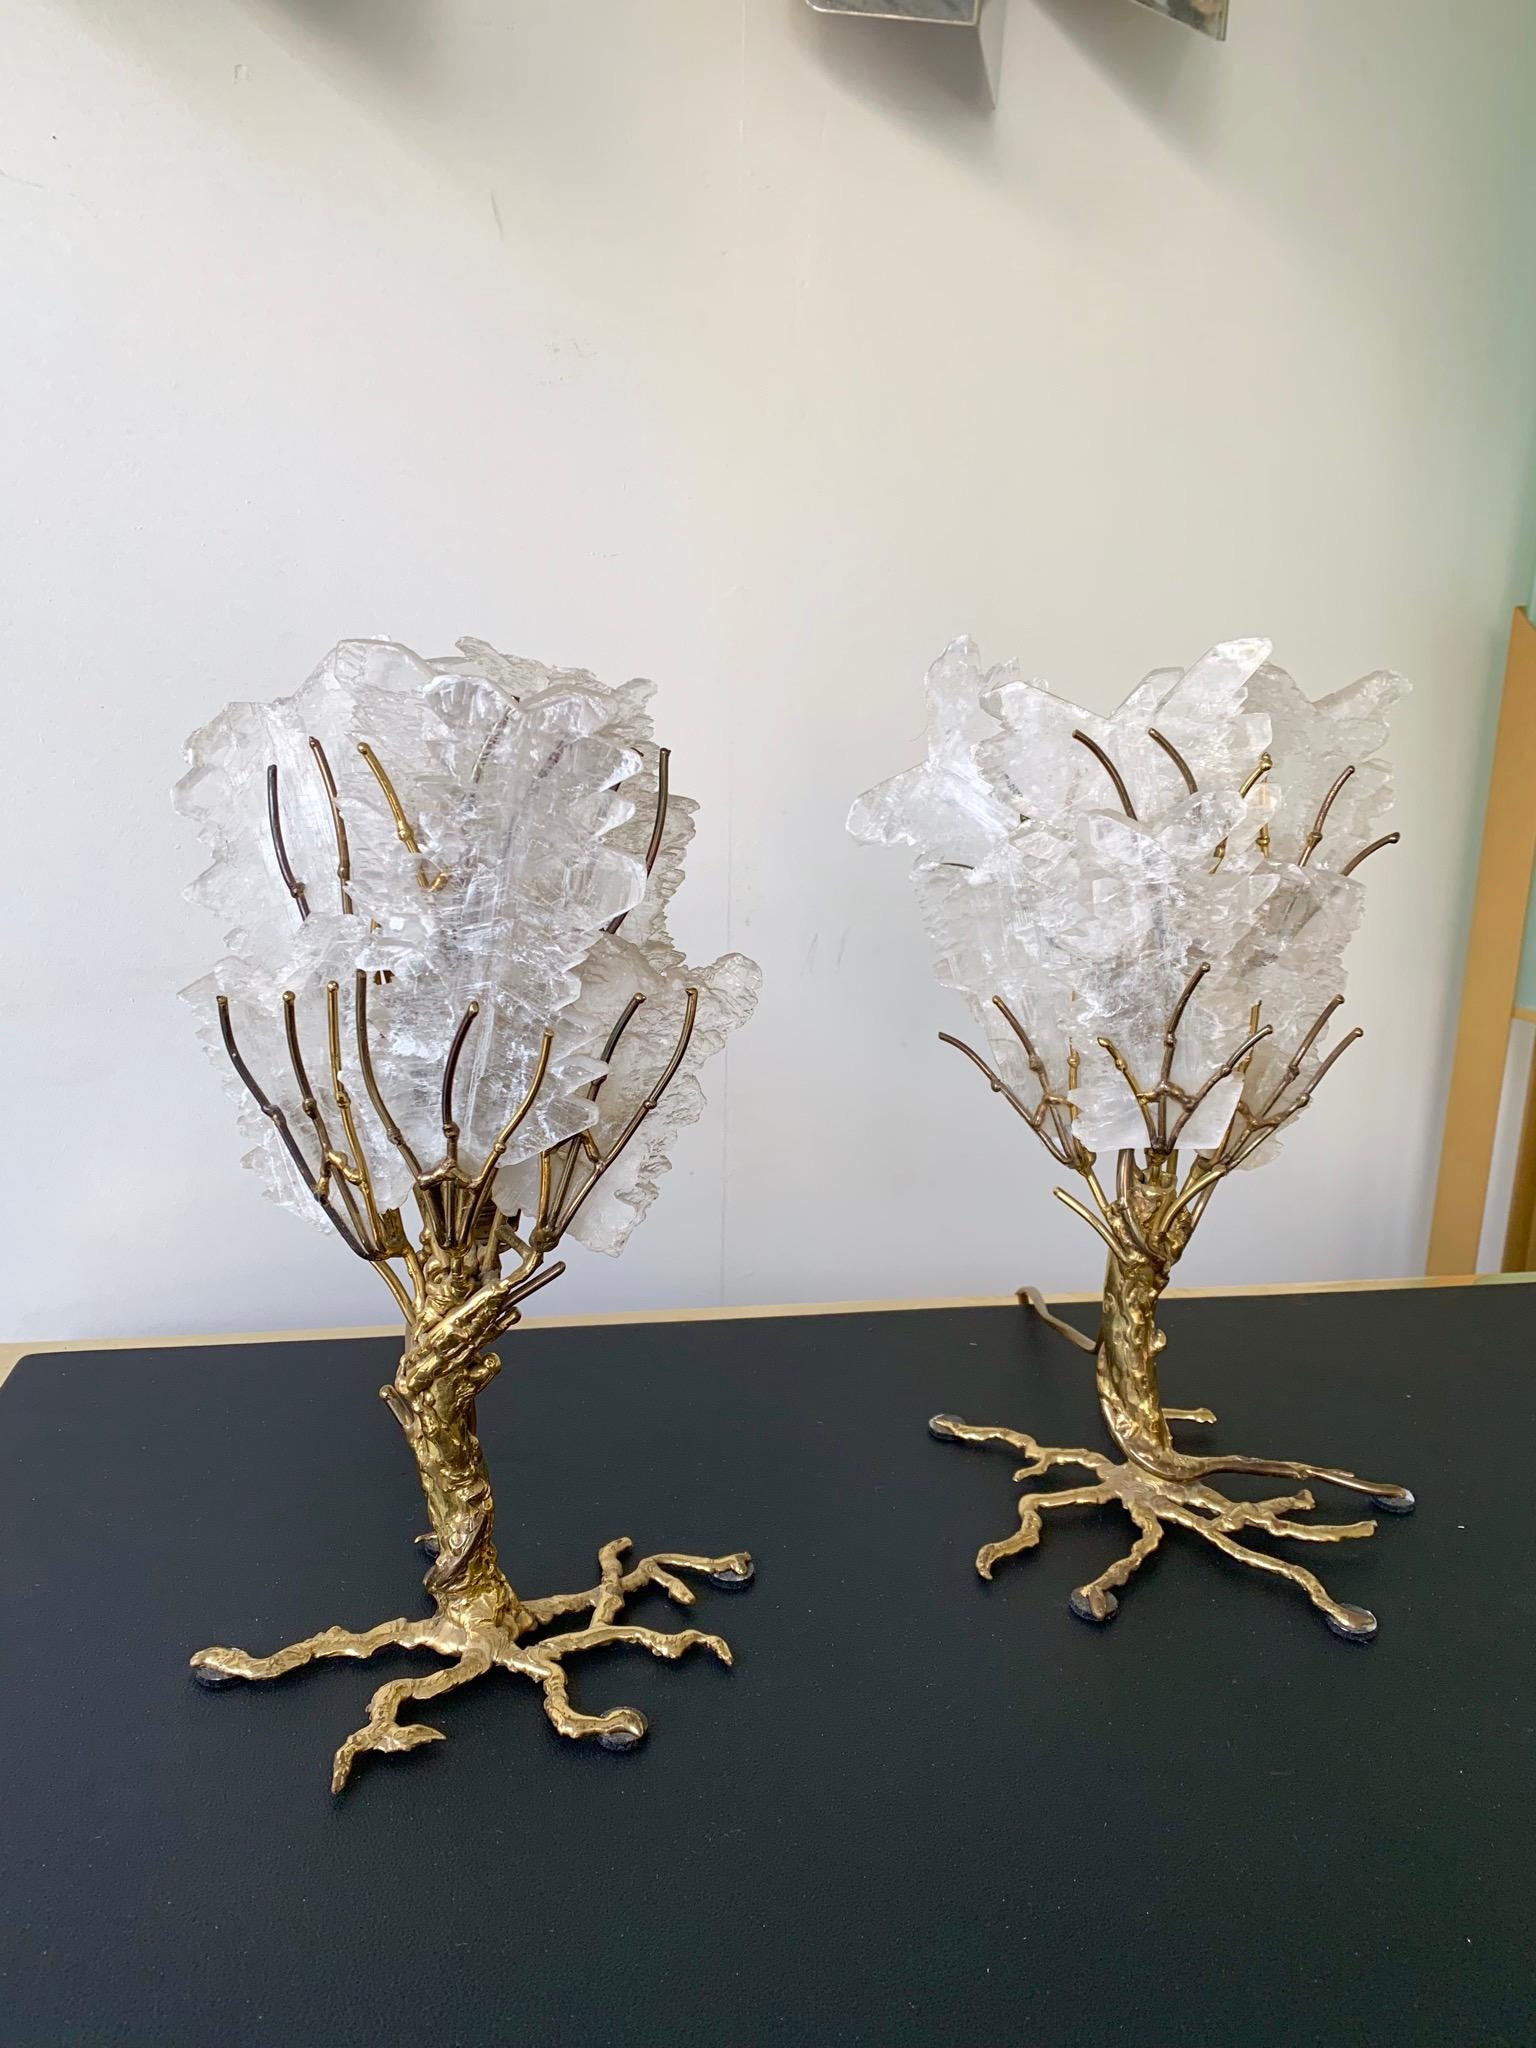 Rare pair of table or bedside lamps by Richard Faure for Maison Honoré in the 1980s. Vegetal style, brass fusion structure and natural gypsum stone. Its a famous manufacture and designer like Henri Fernandez, Isabelle Faure, jansen, Bagues, Maison